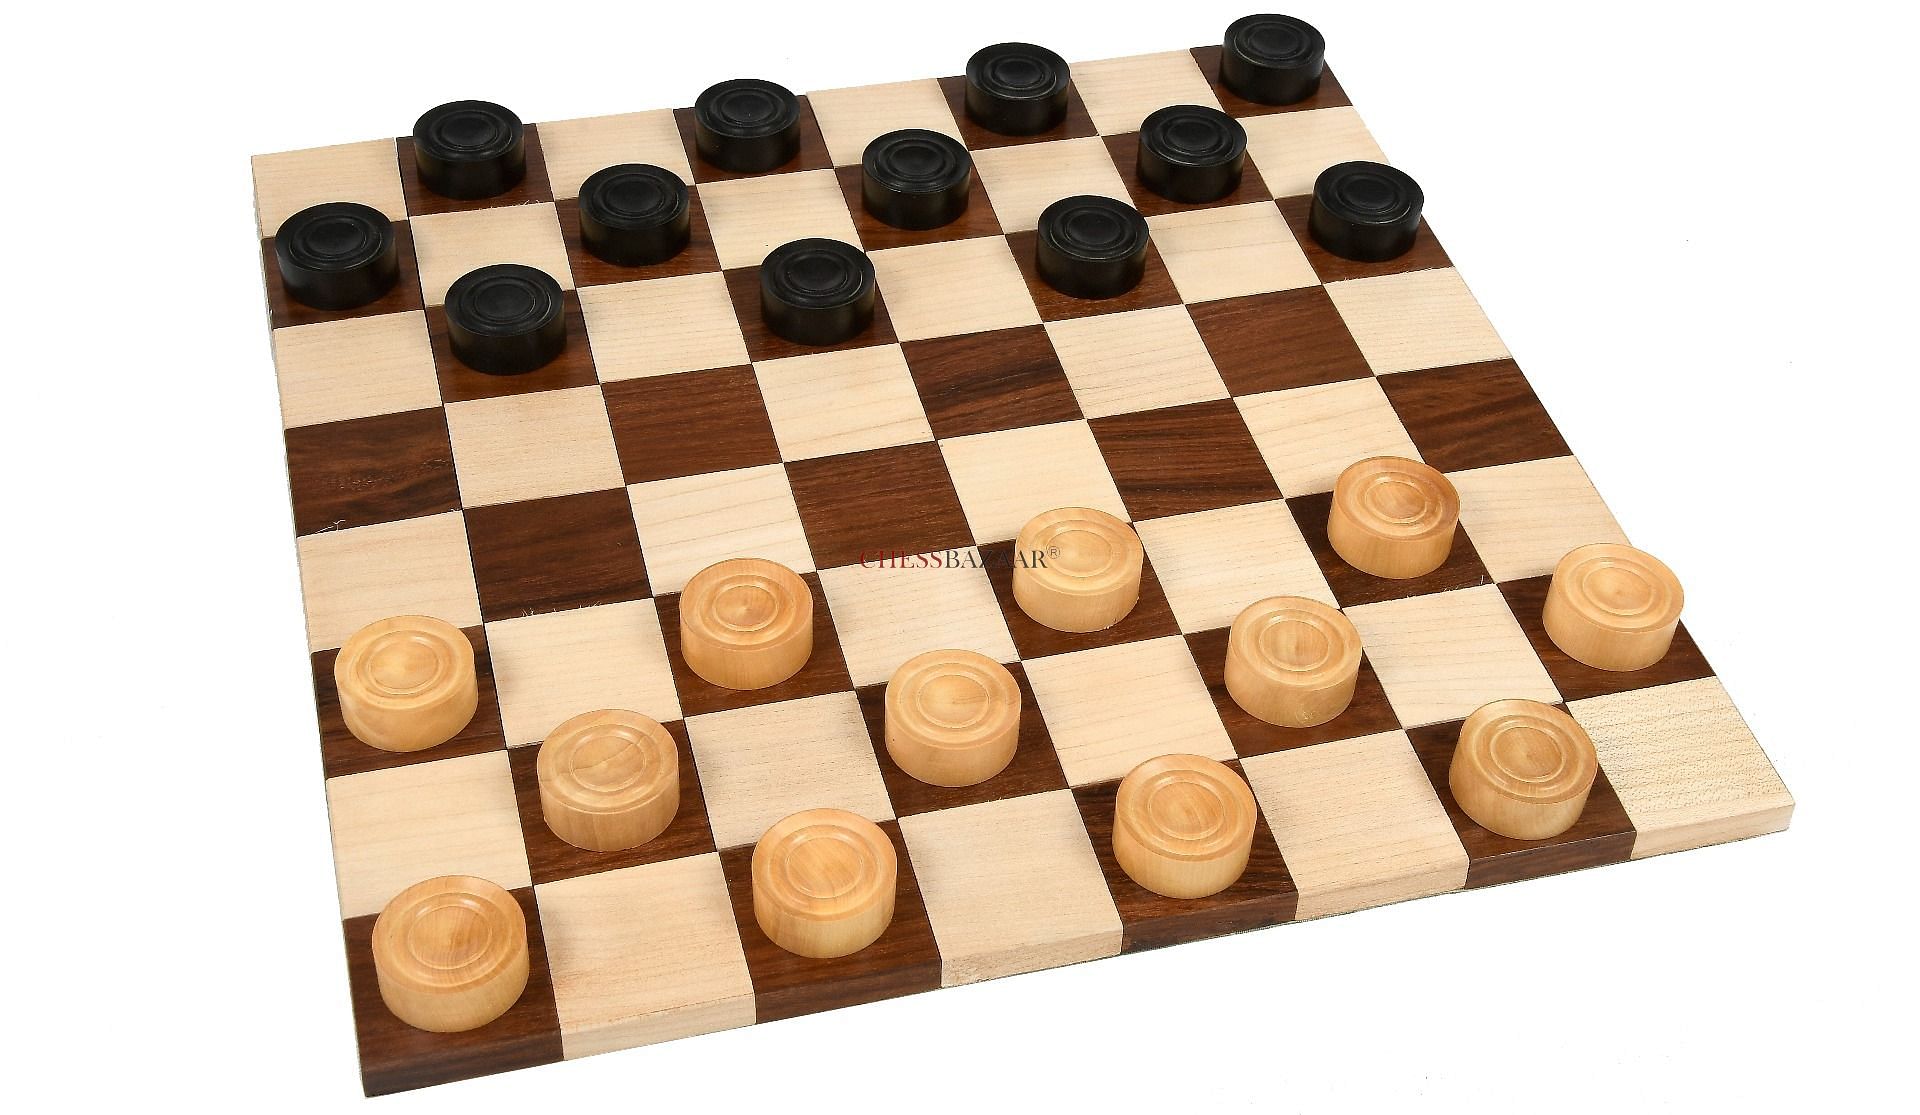 Games Box with Checkers / Draughts Circa 1830: Opens to a Chess Board